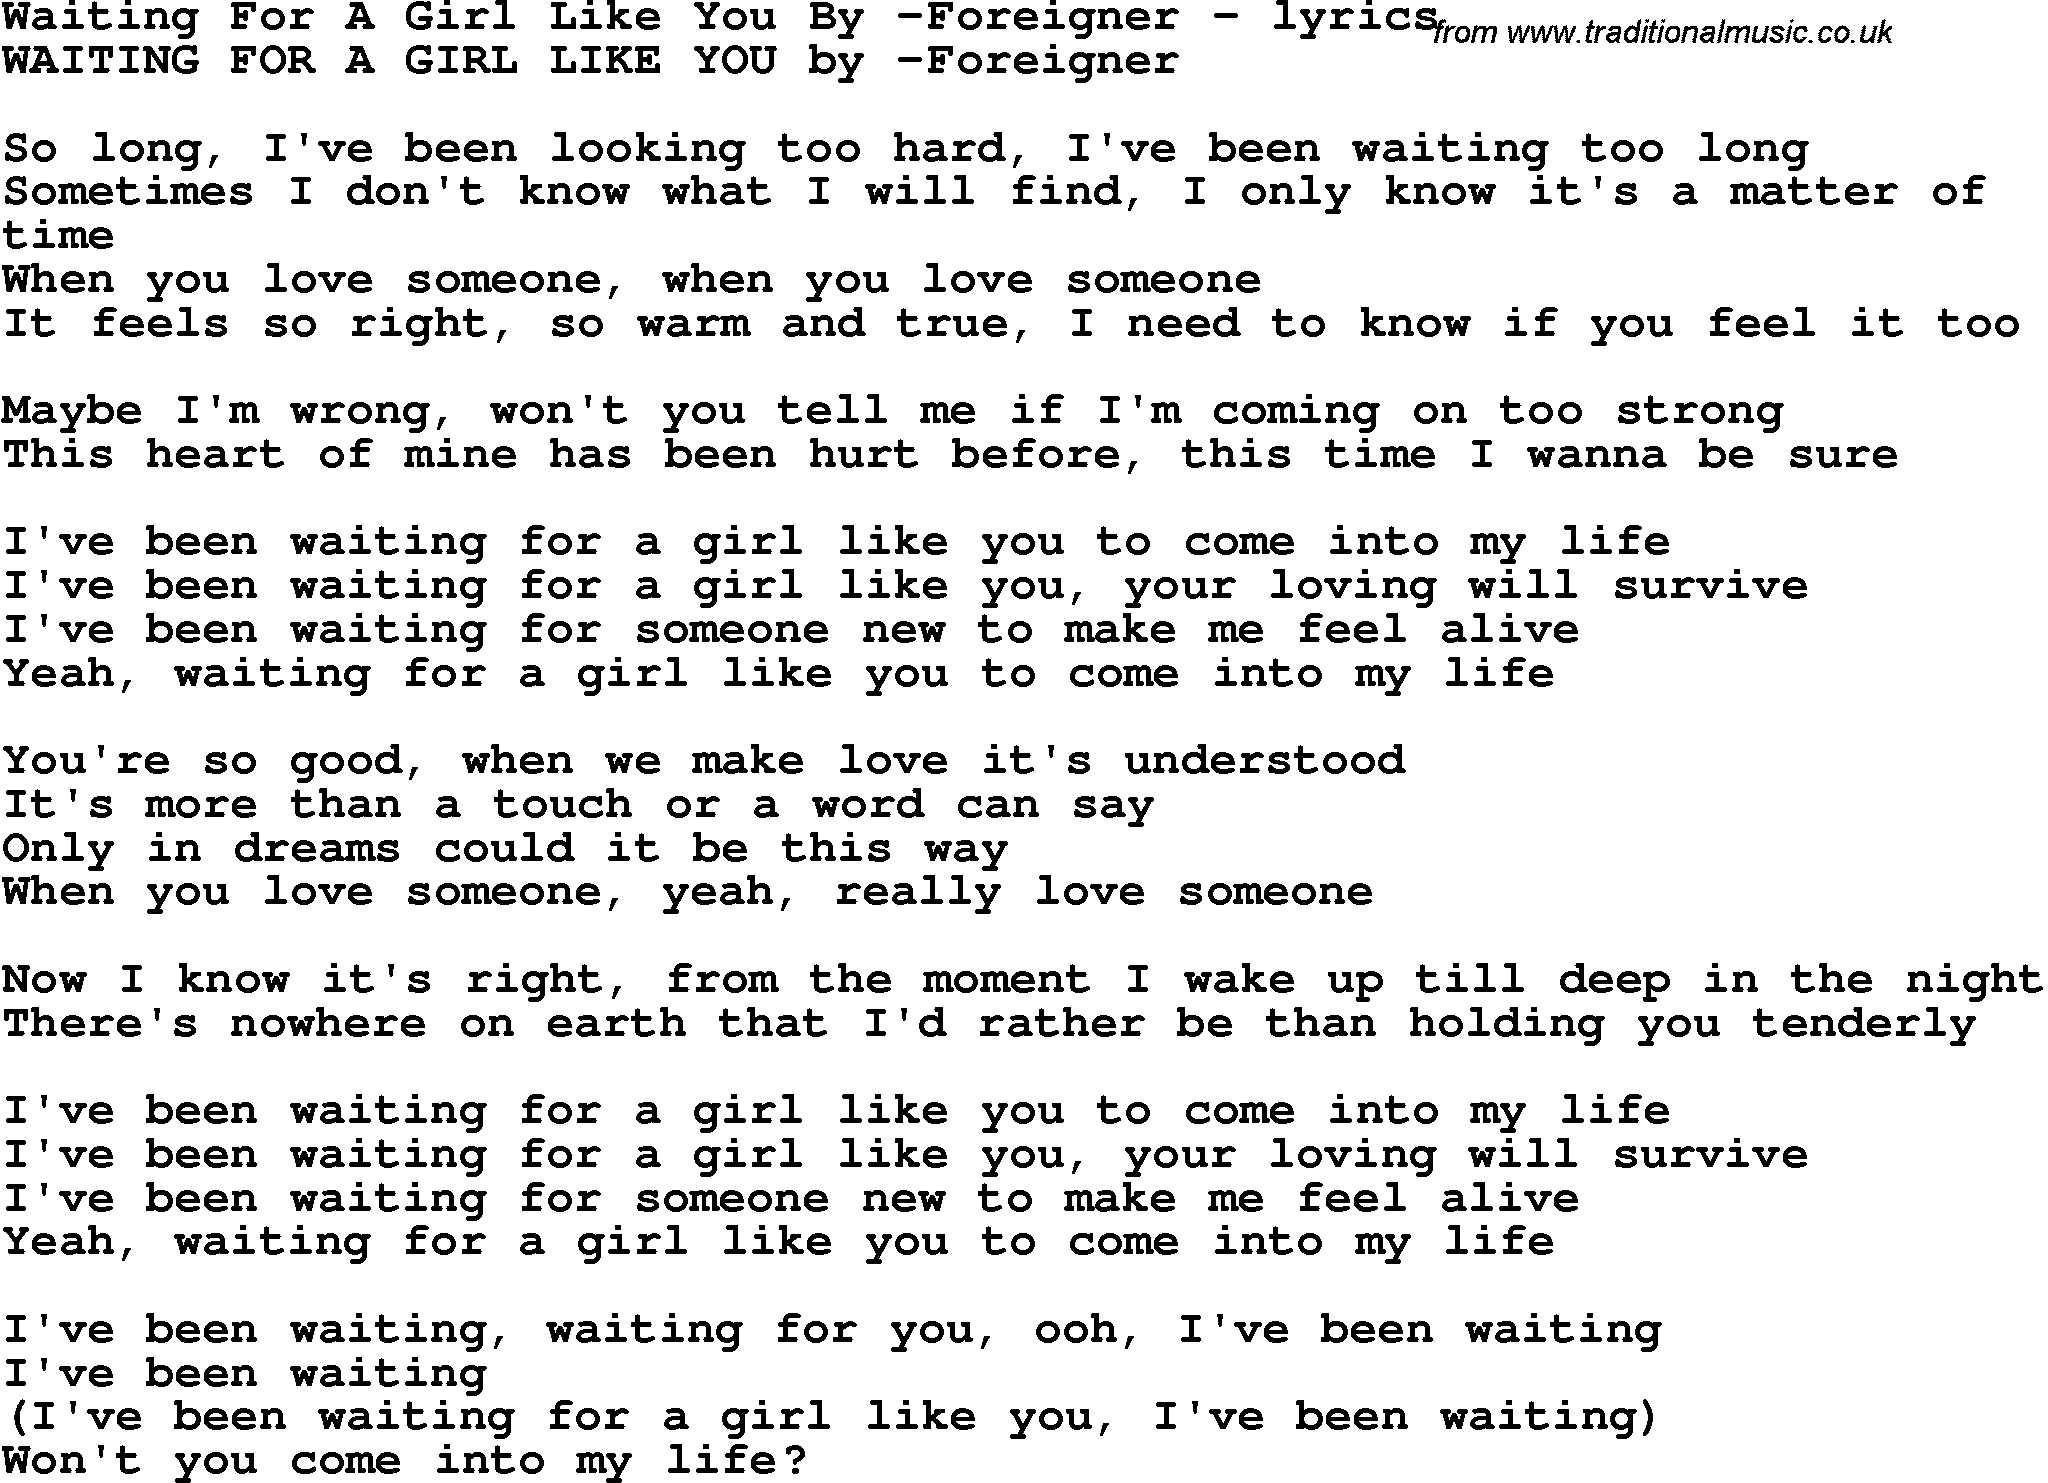 Love Song Lyrics for: Waiting For A Girl Like You By -Foreigner